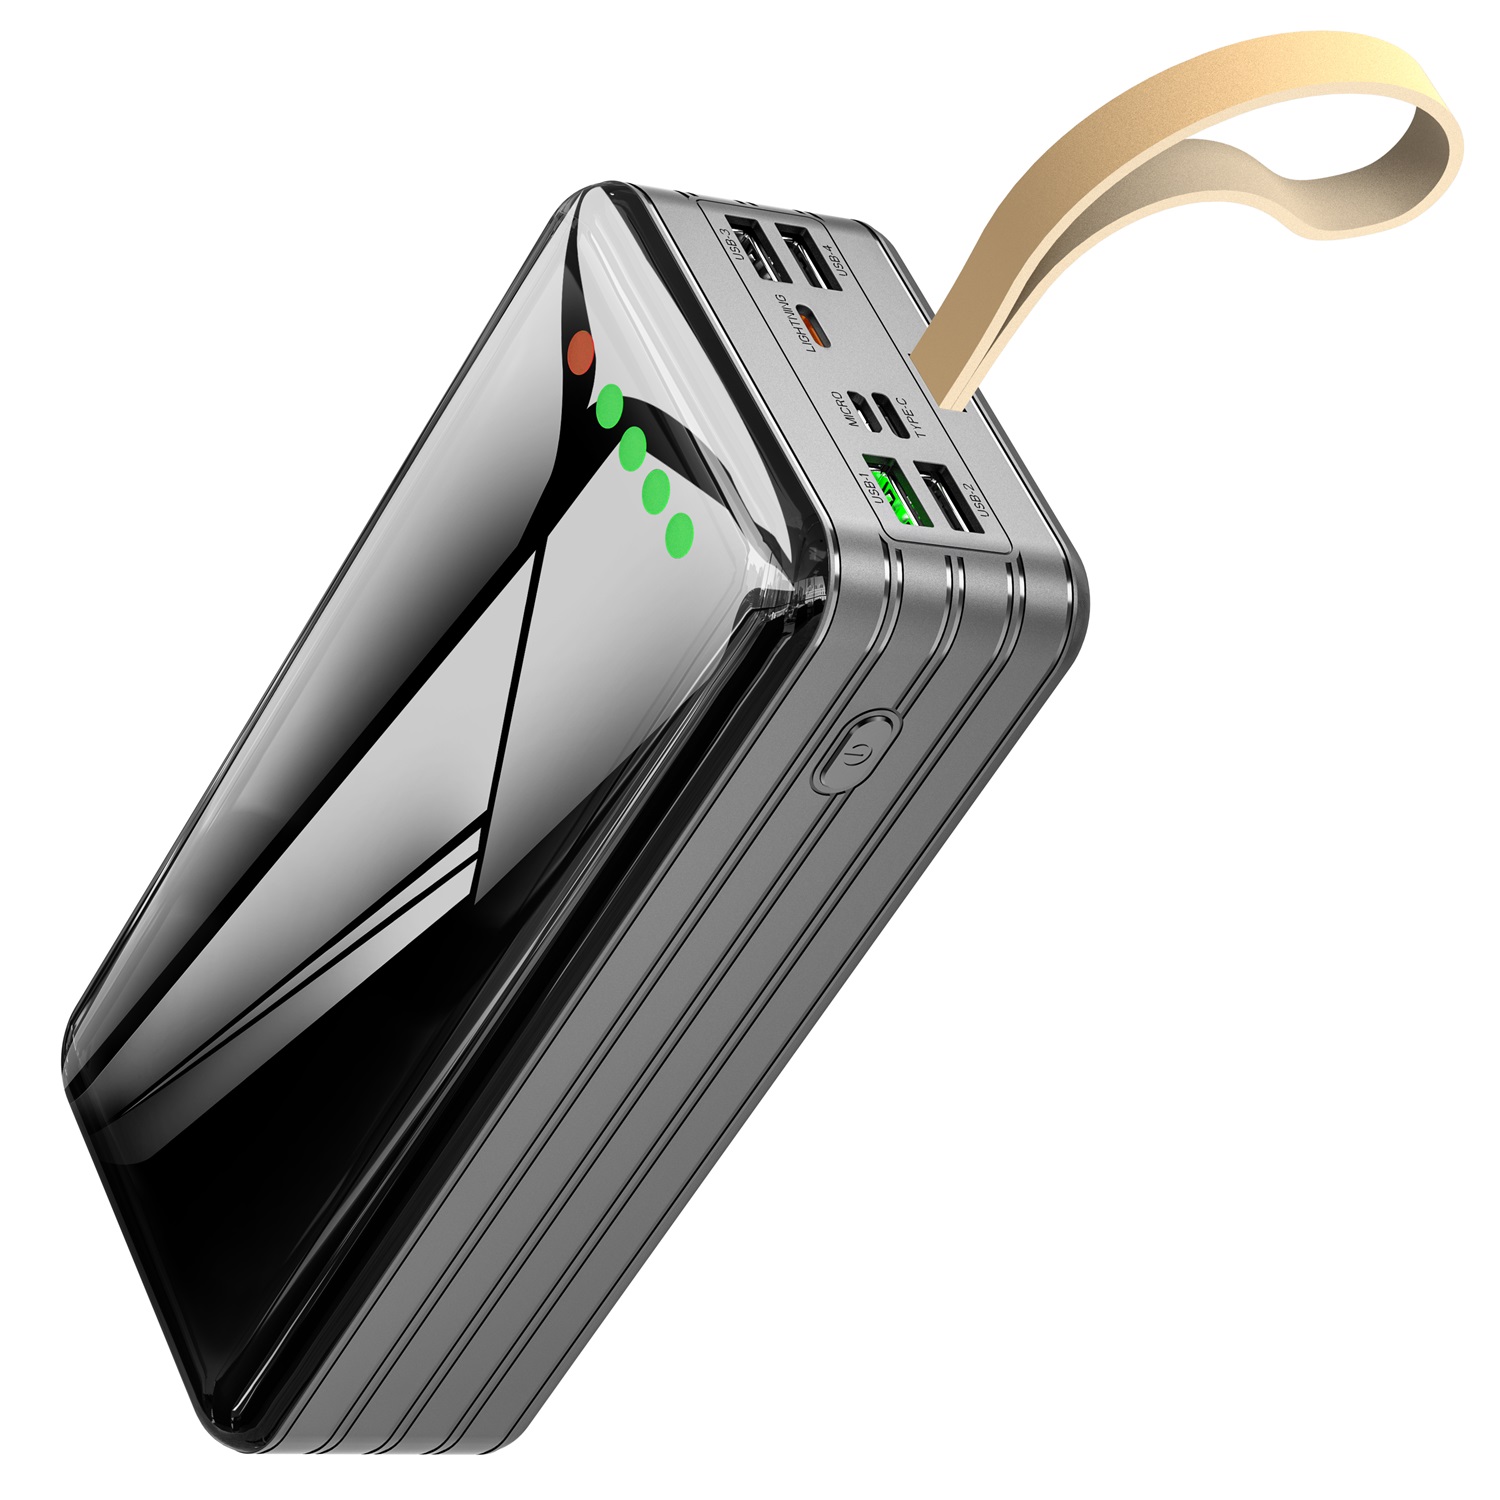 Toospon Phone Portable Charger, Power Bank - 80000mAh QC 22.5W Power Station External Battery Pack for Outdoor Use with Fast Charging PD 20W, External Battery For iphone, ipad, Samsung, Huawei, Smartphones Speaker etc.